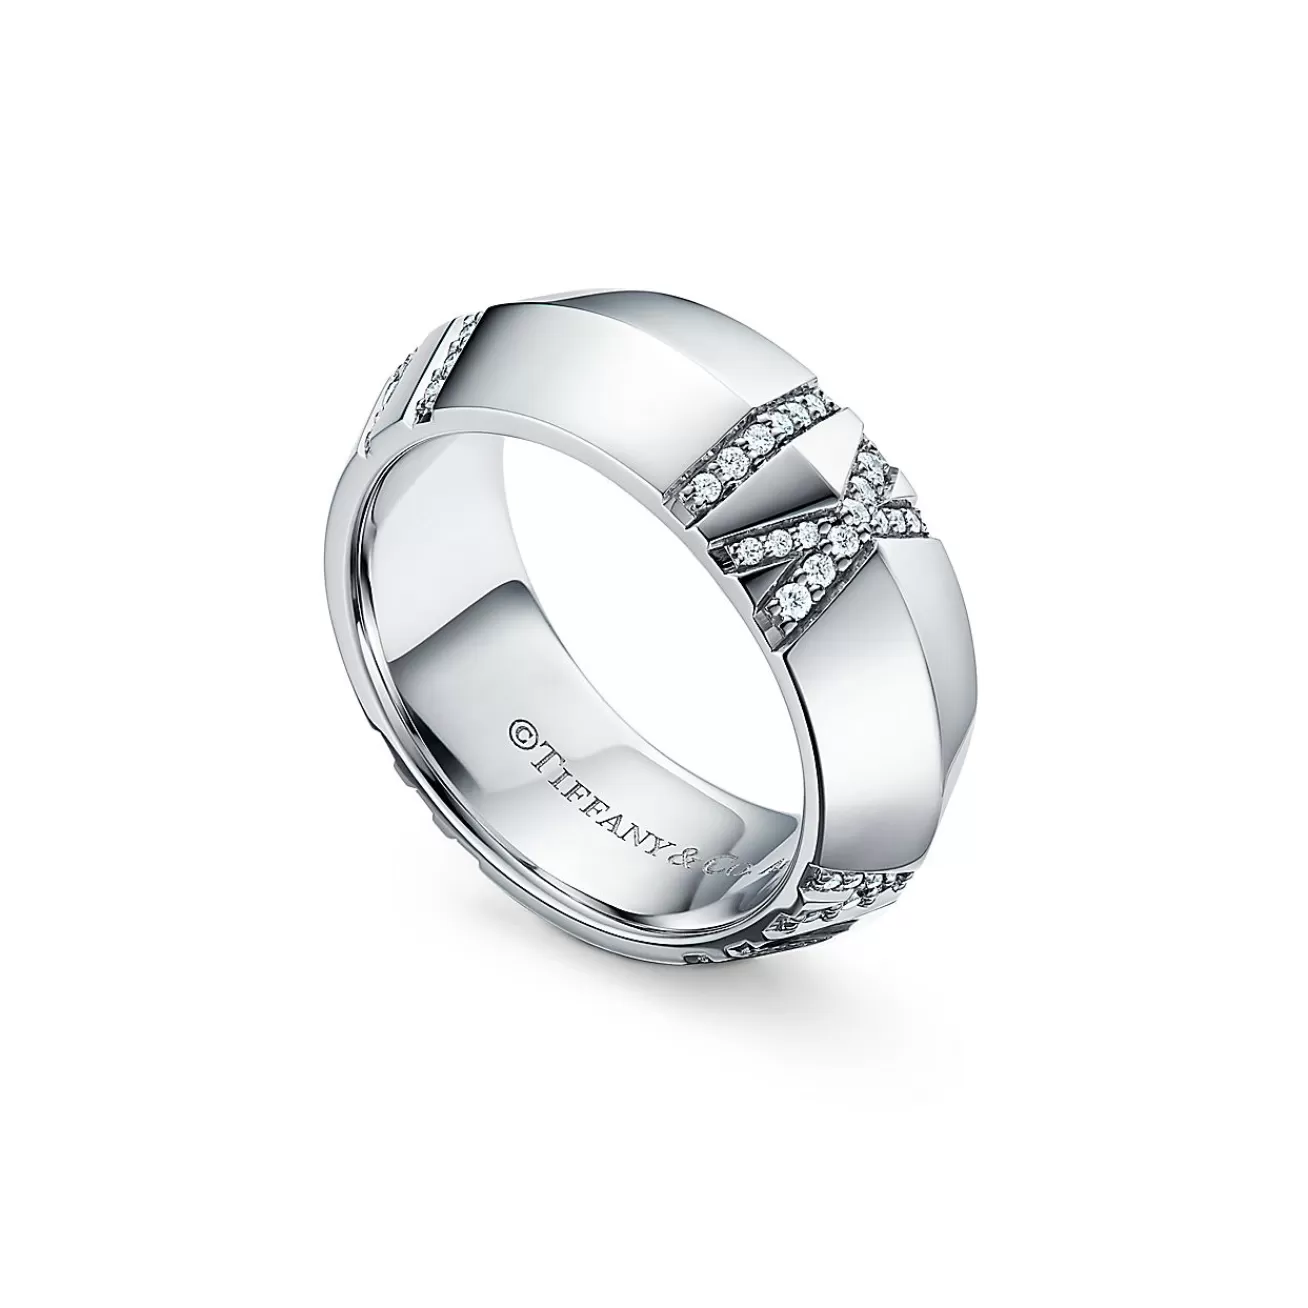 Tiffany & Co. Atlas® X Closed Wide Ring in White Gold with Diamonds, 7.5 mm Wide | ^ Rings | Men's Jewelry